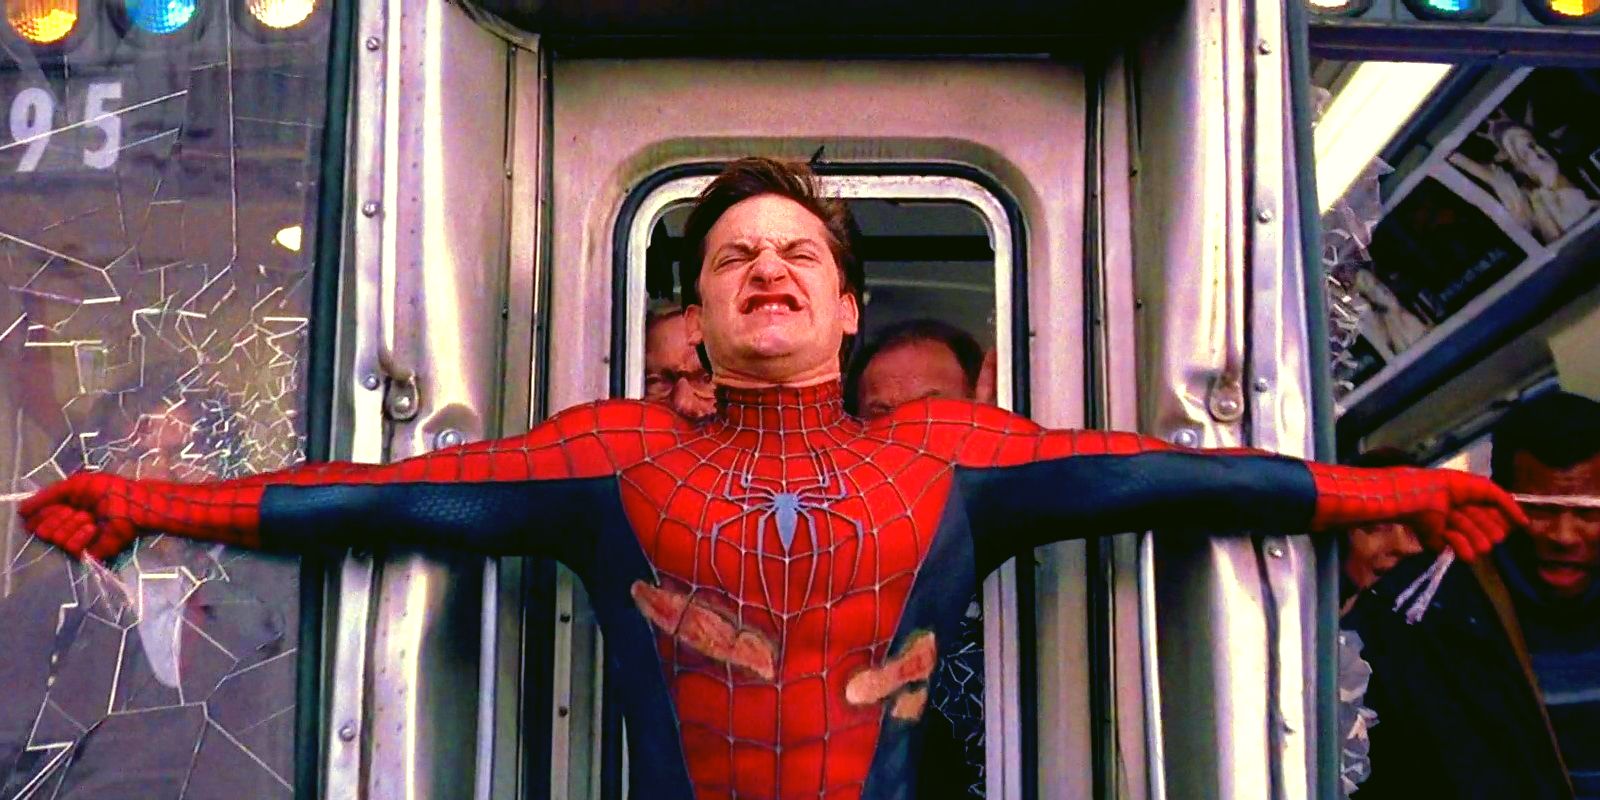 Tobey Maguire's Spider-Man stopping a train with his body